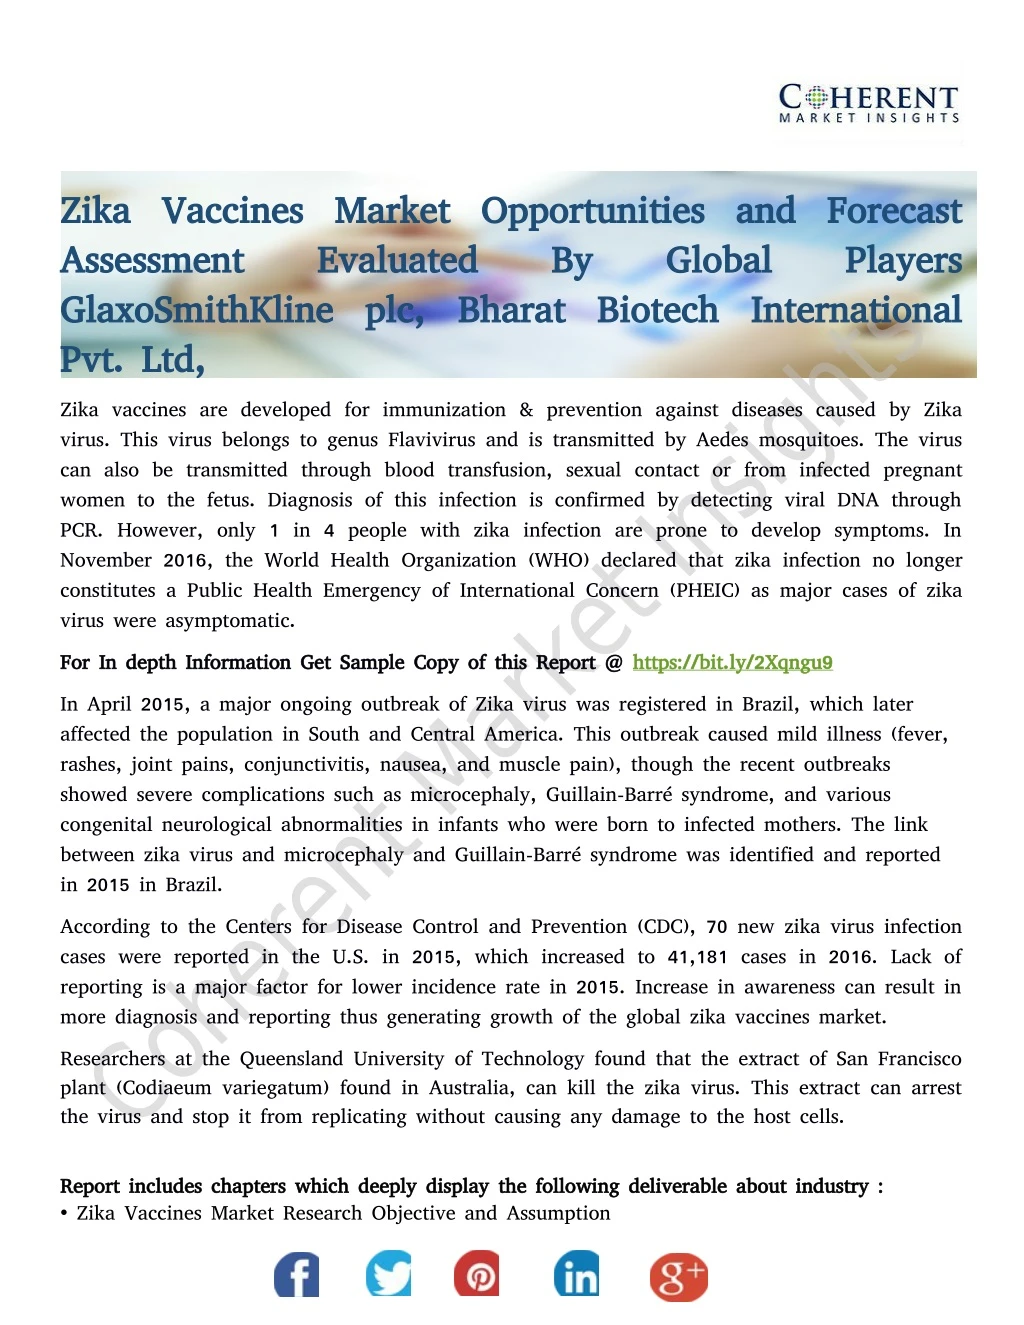 zika vaccines market opportunities and forecast